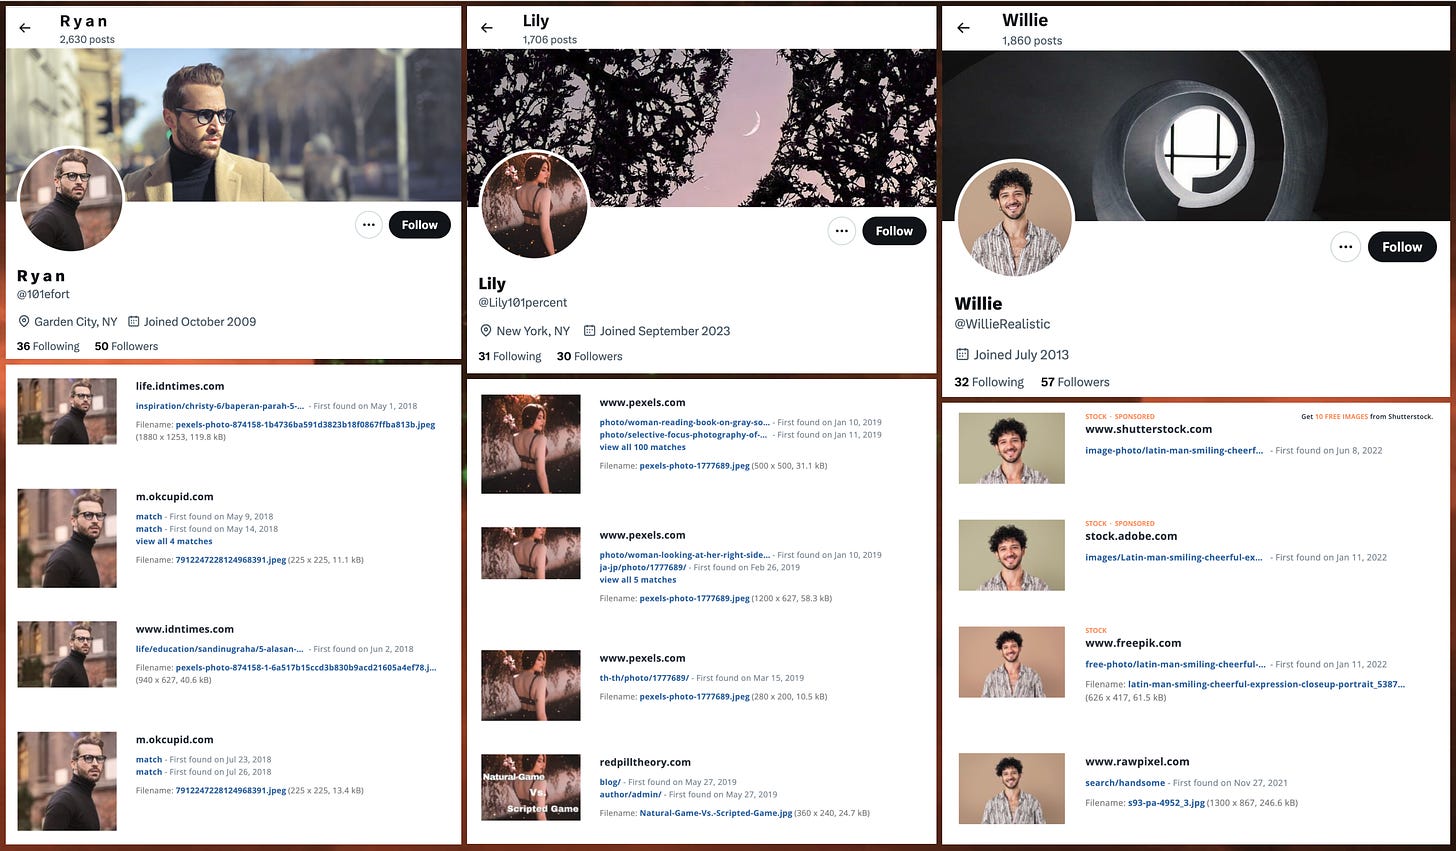 screenshots of the profiles of three of the accounts in the network, and screenshots of TinEye searches demonstrating that the images are plagiarized